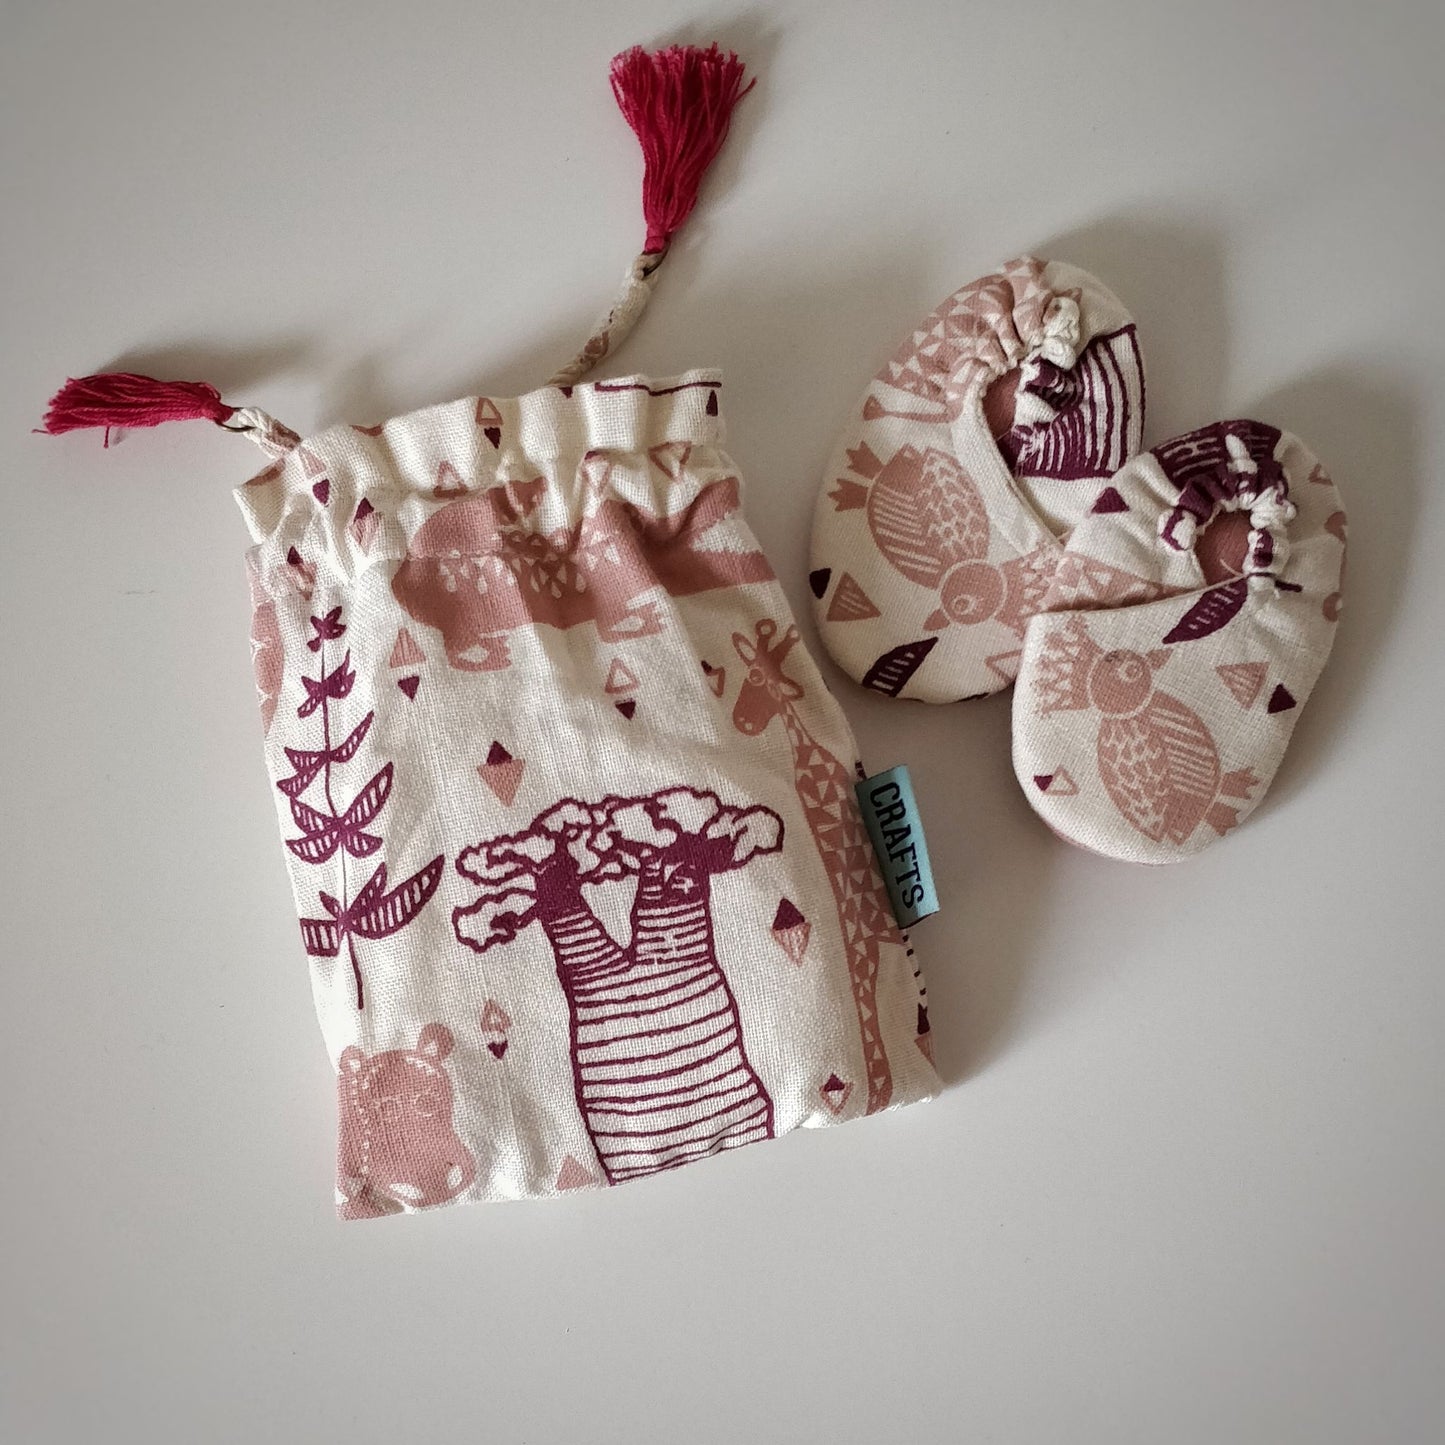 Handmade and Fair Trade Cotton Baby Shoes - raspberry with bag